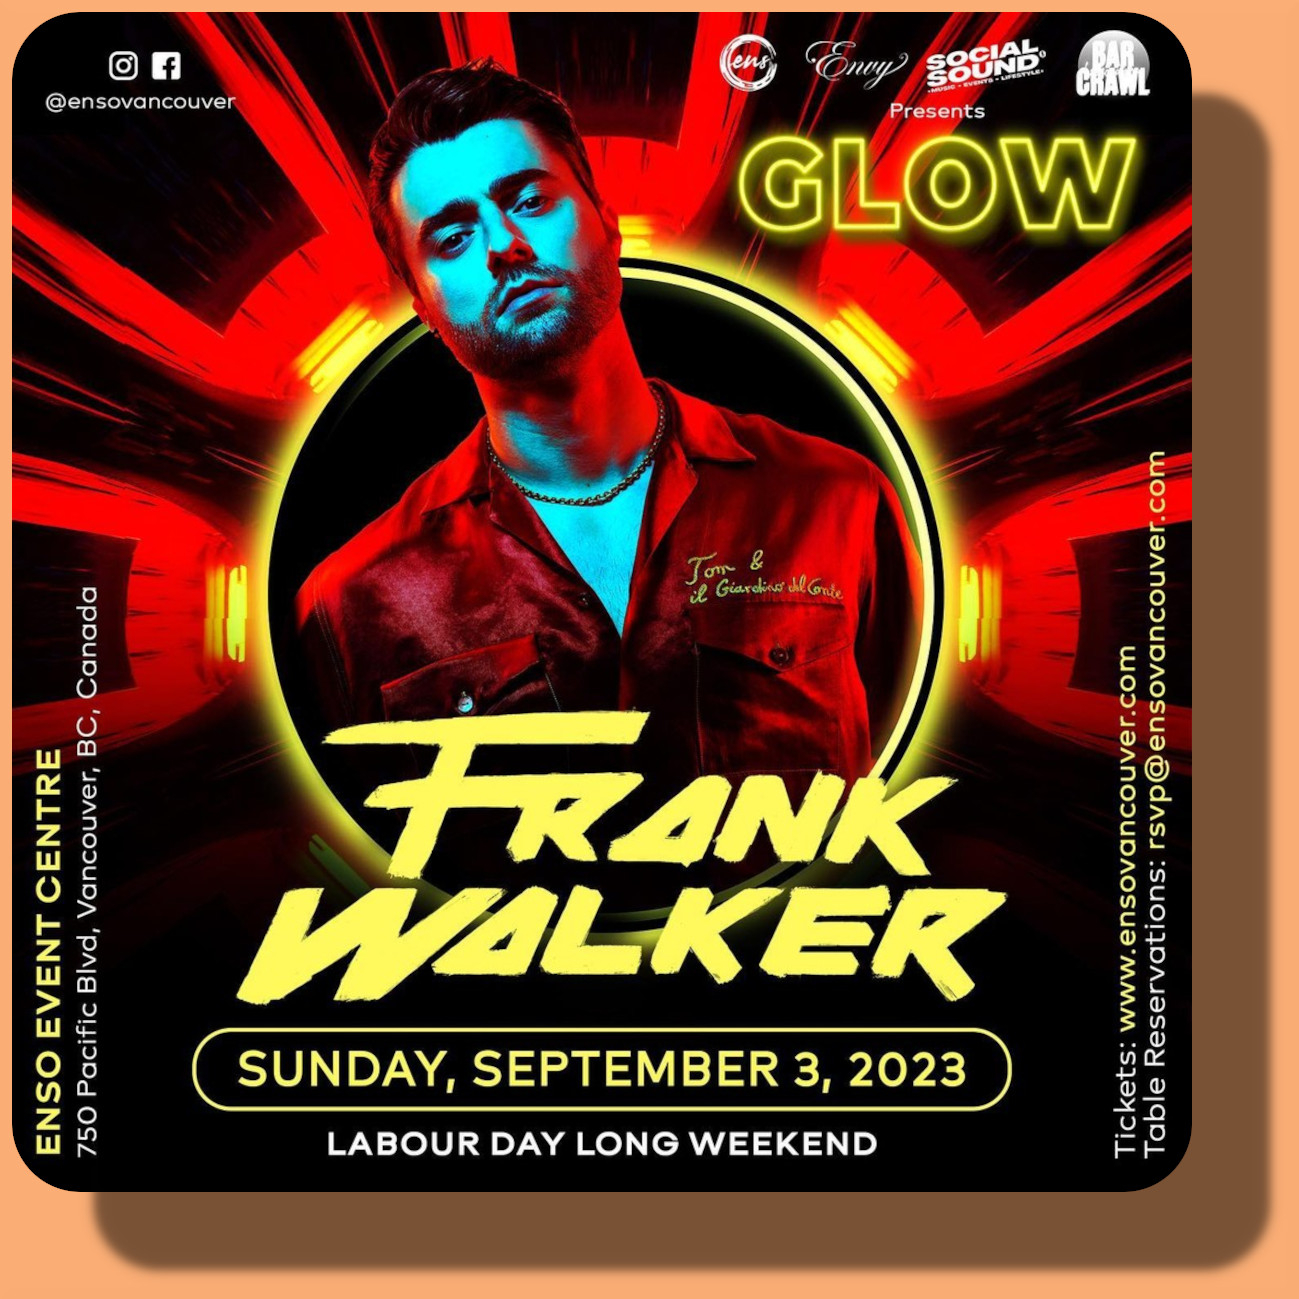 GLOW Party Extravaganza in Vancouver: September 3, 2023